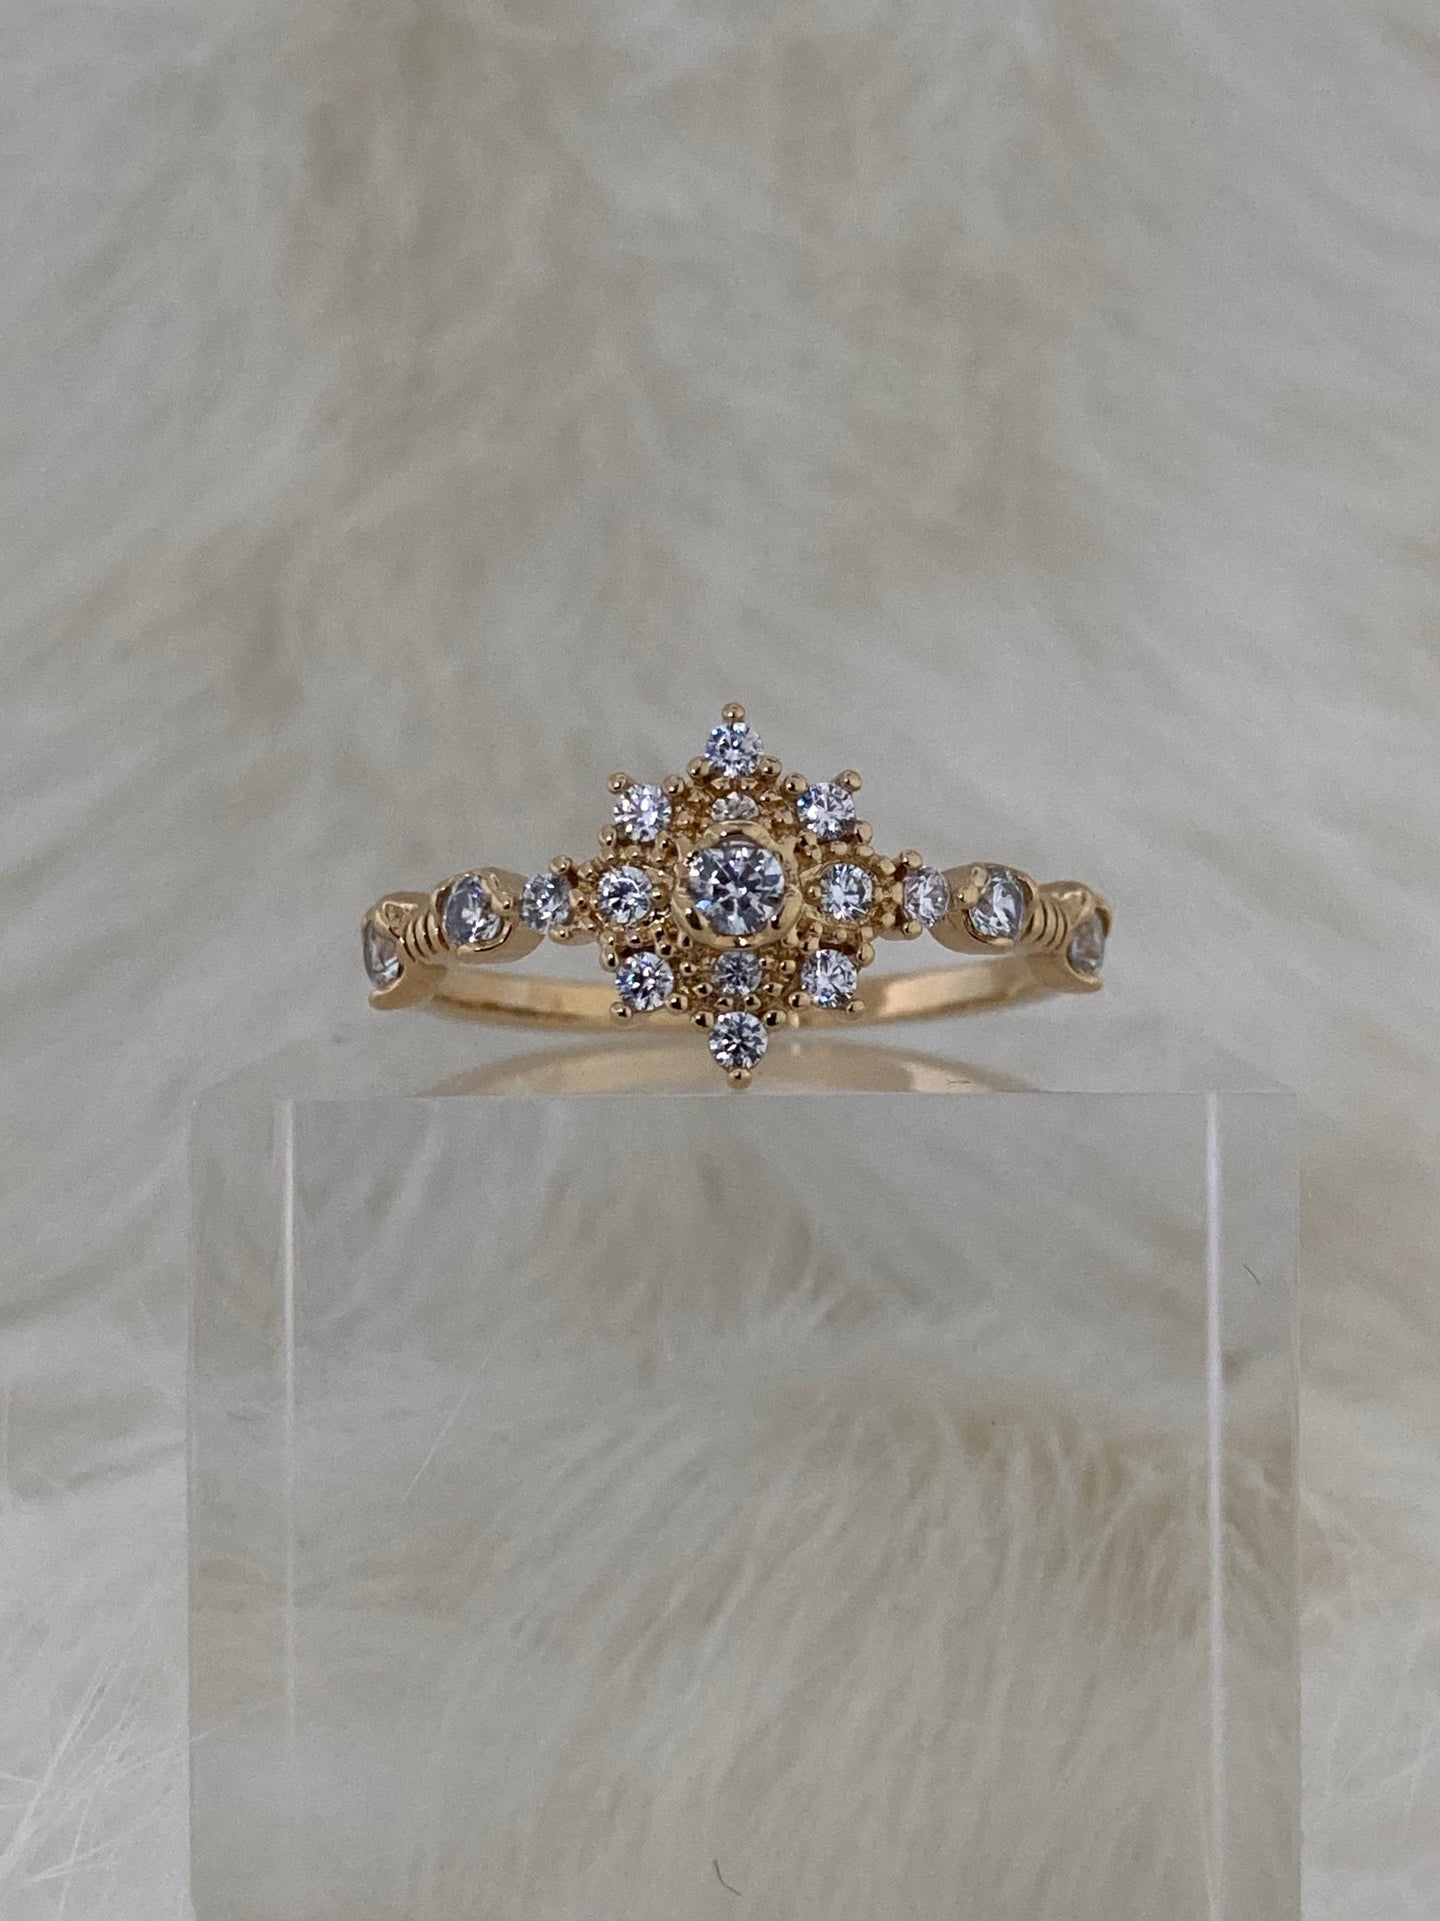 Dainty rings, dainty ring stack, dainty ring stacking, gold dainty ring stack, dainty stackable ring, dainty ring gold stacks, stackable rings, stackable ring sets, dainty rings gold, dainty rings vintage, CZ rings that look real, cz rings gold